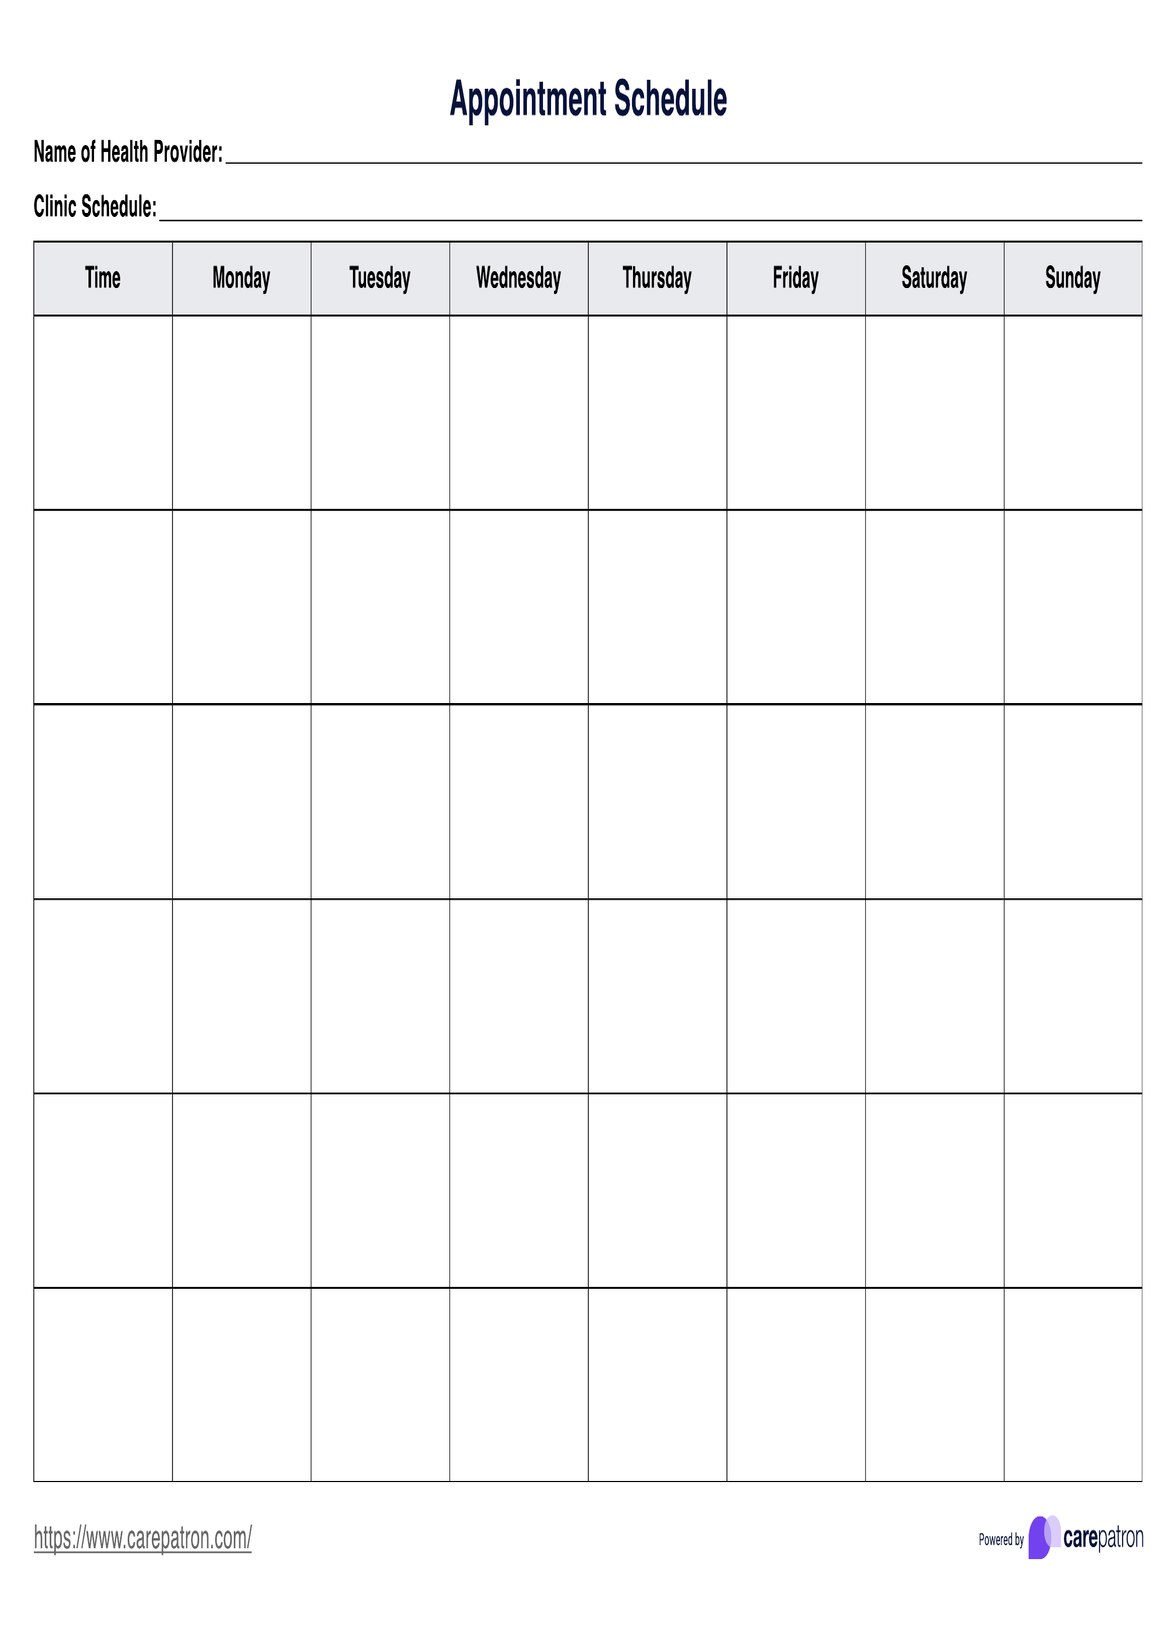 Appointment Schedule Template PDF Example